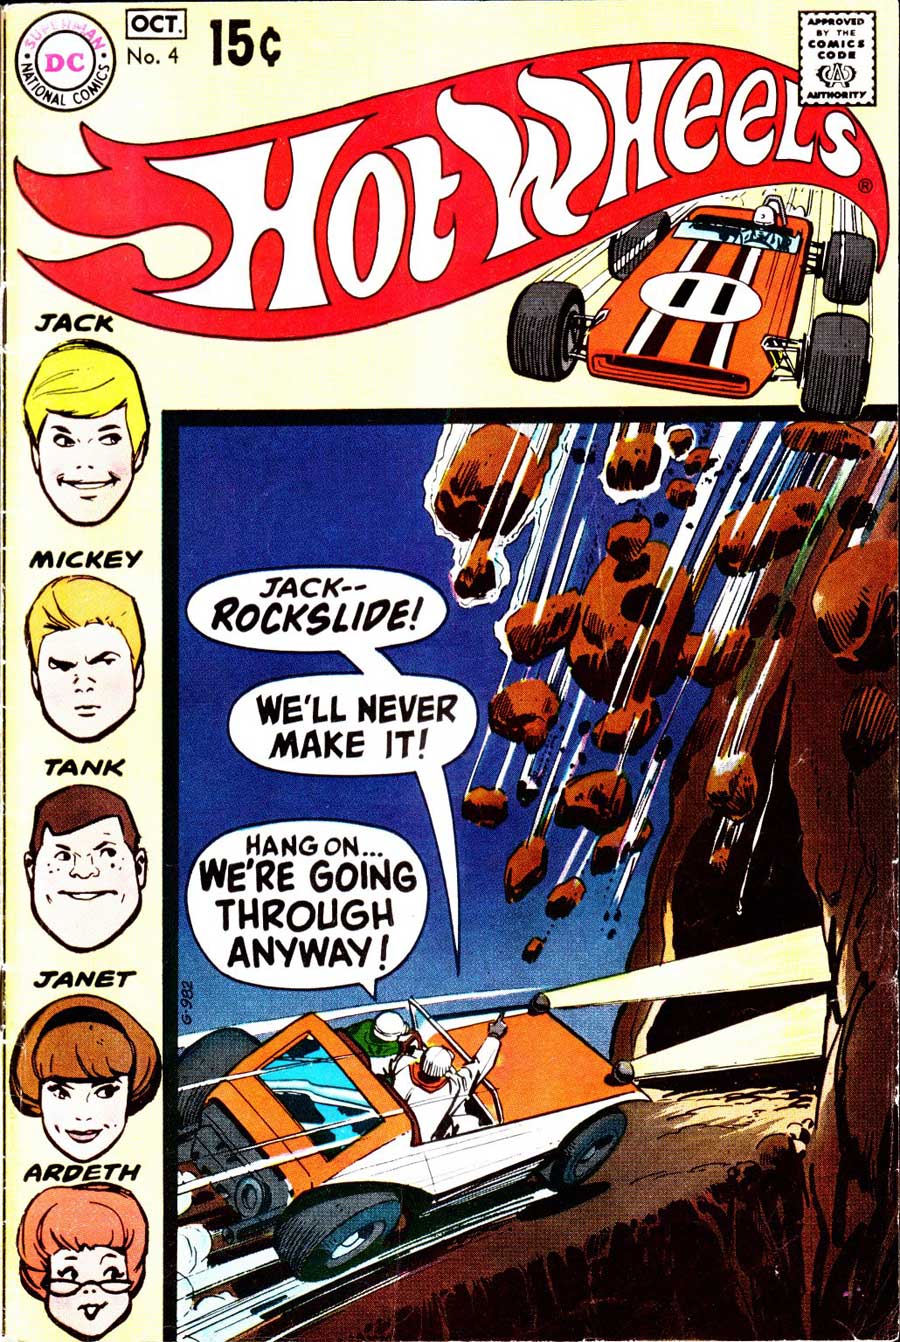 Hot Wheels v1 #4 dc 1970s bronze age comic book cover art by Alex Toth